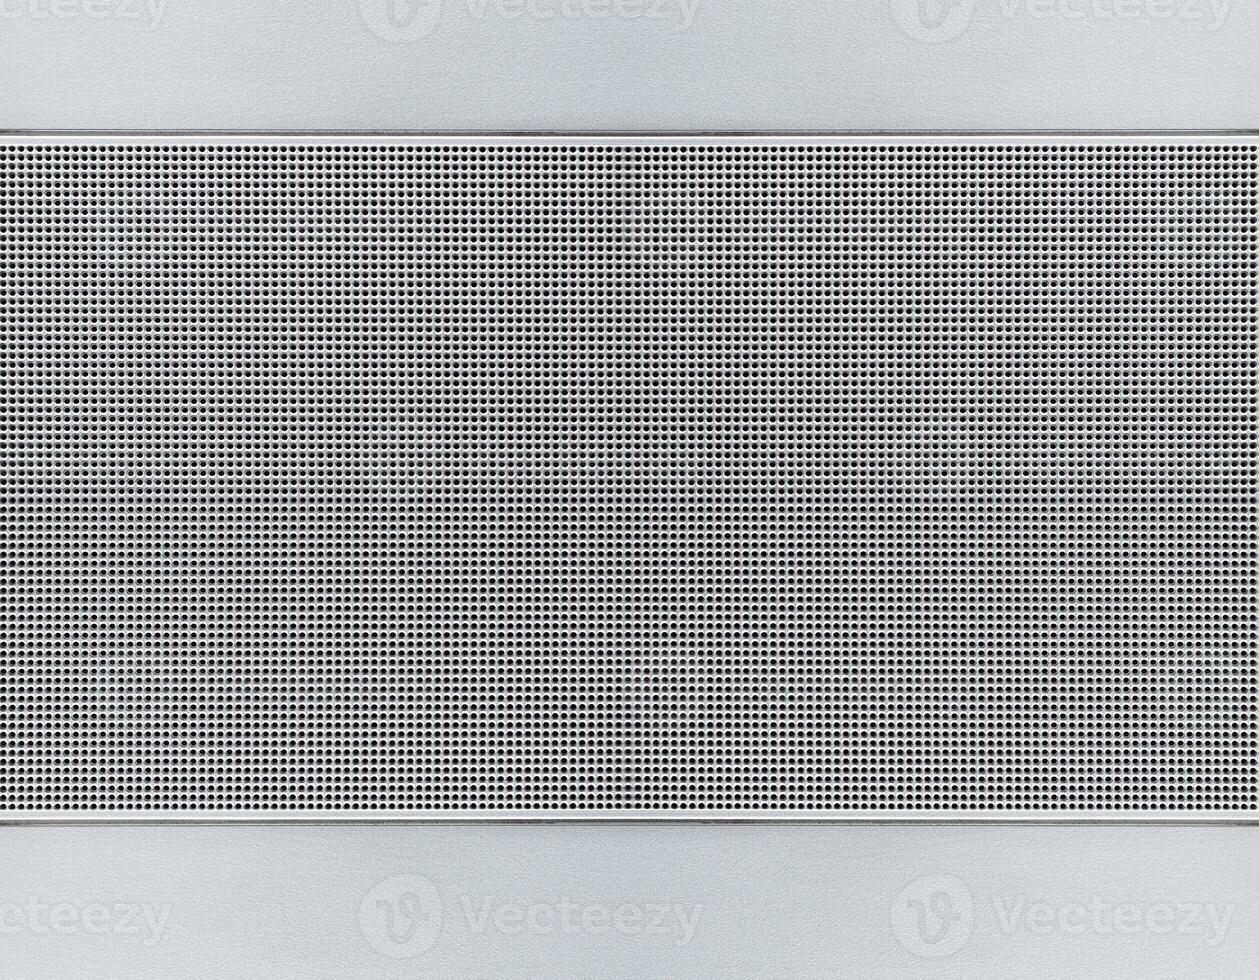 Spot lit perforated metal plate photo